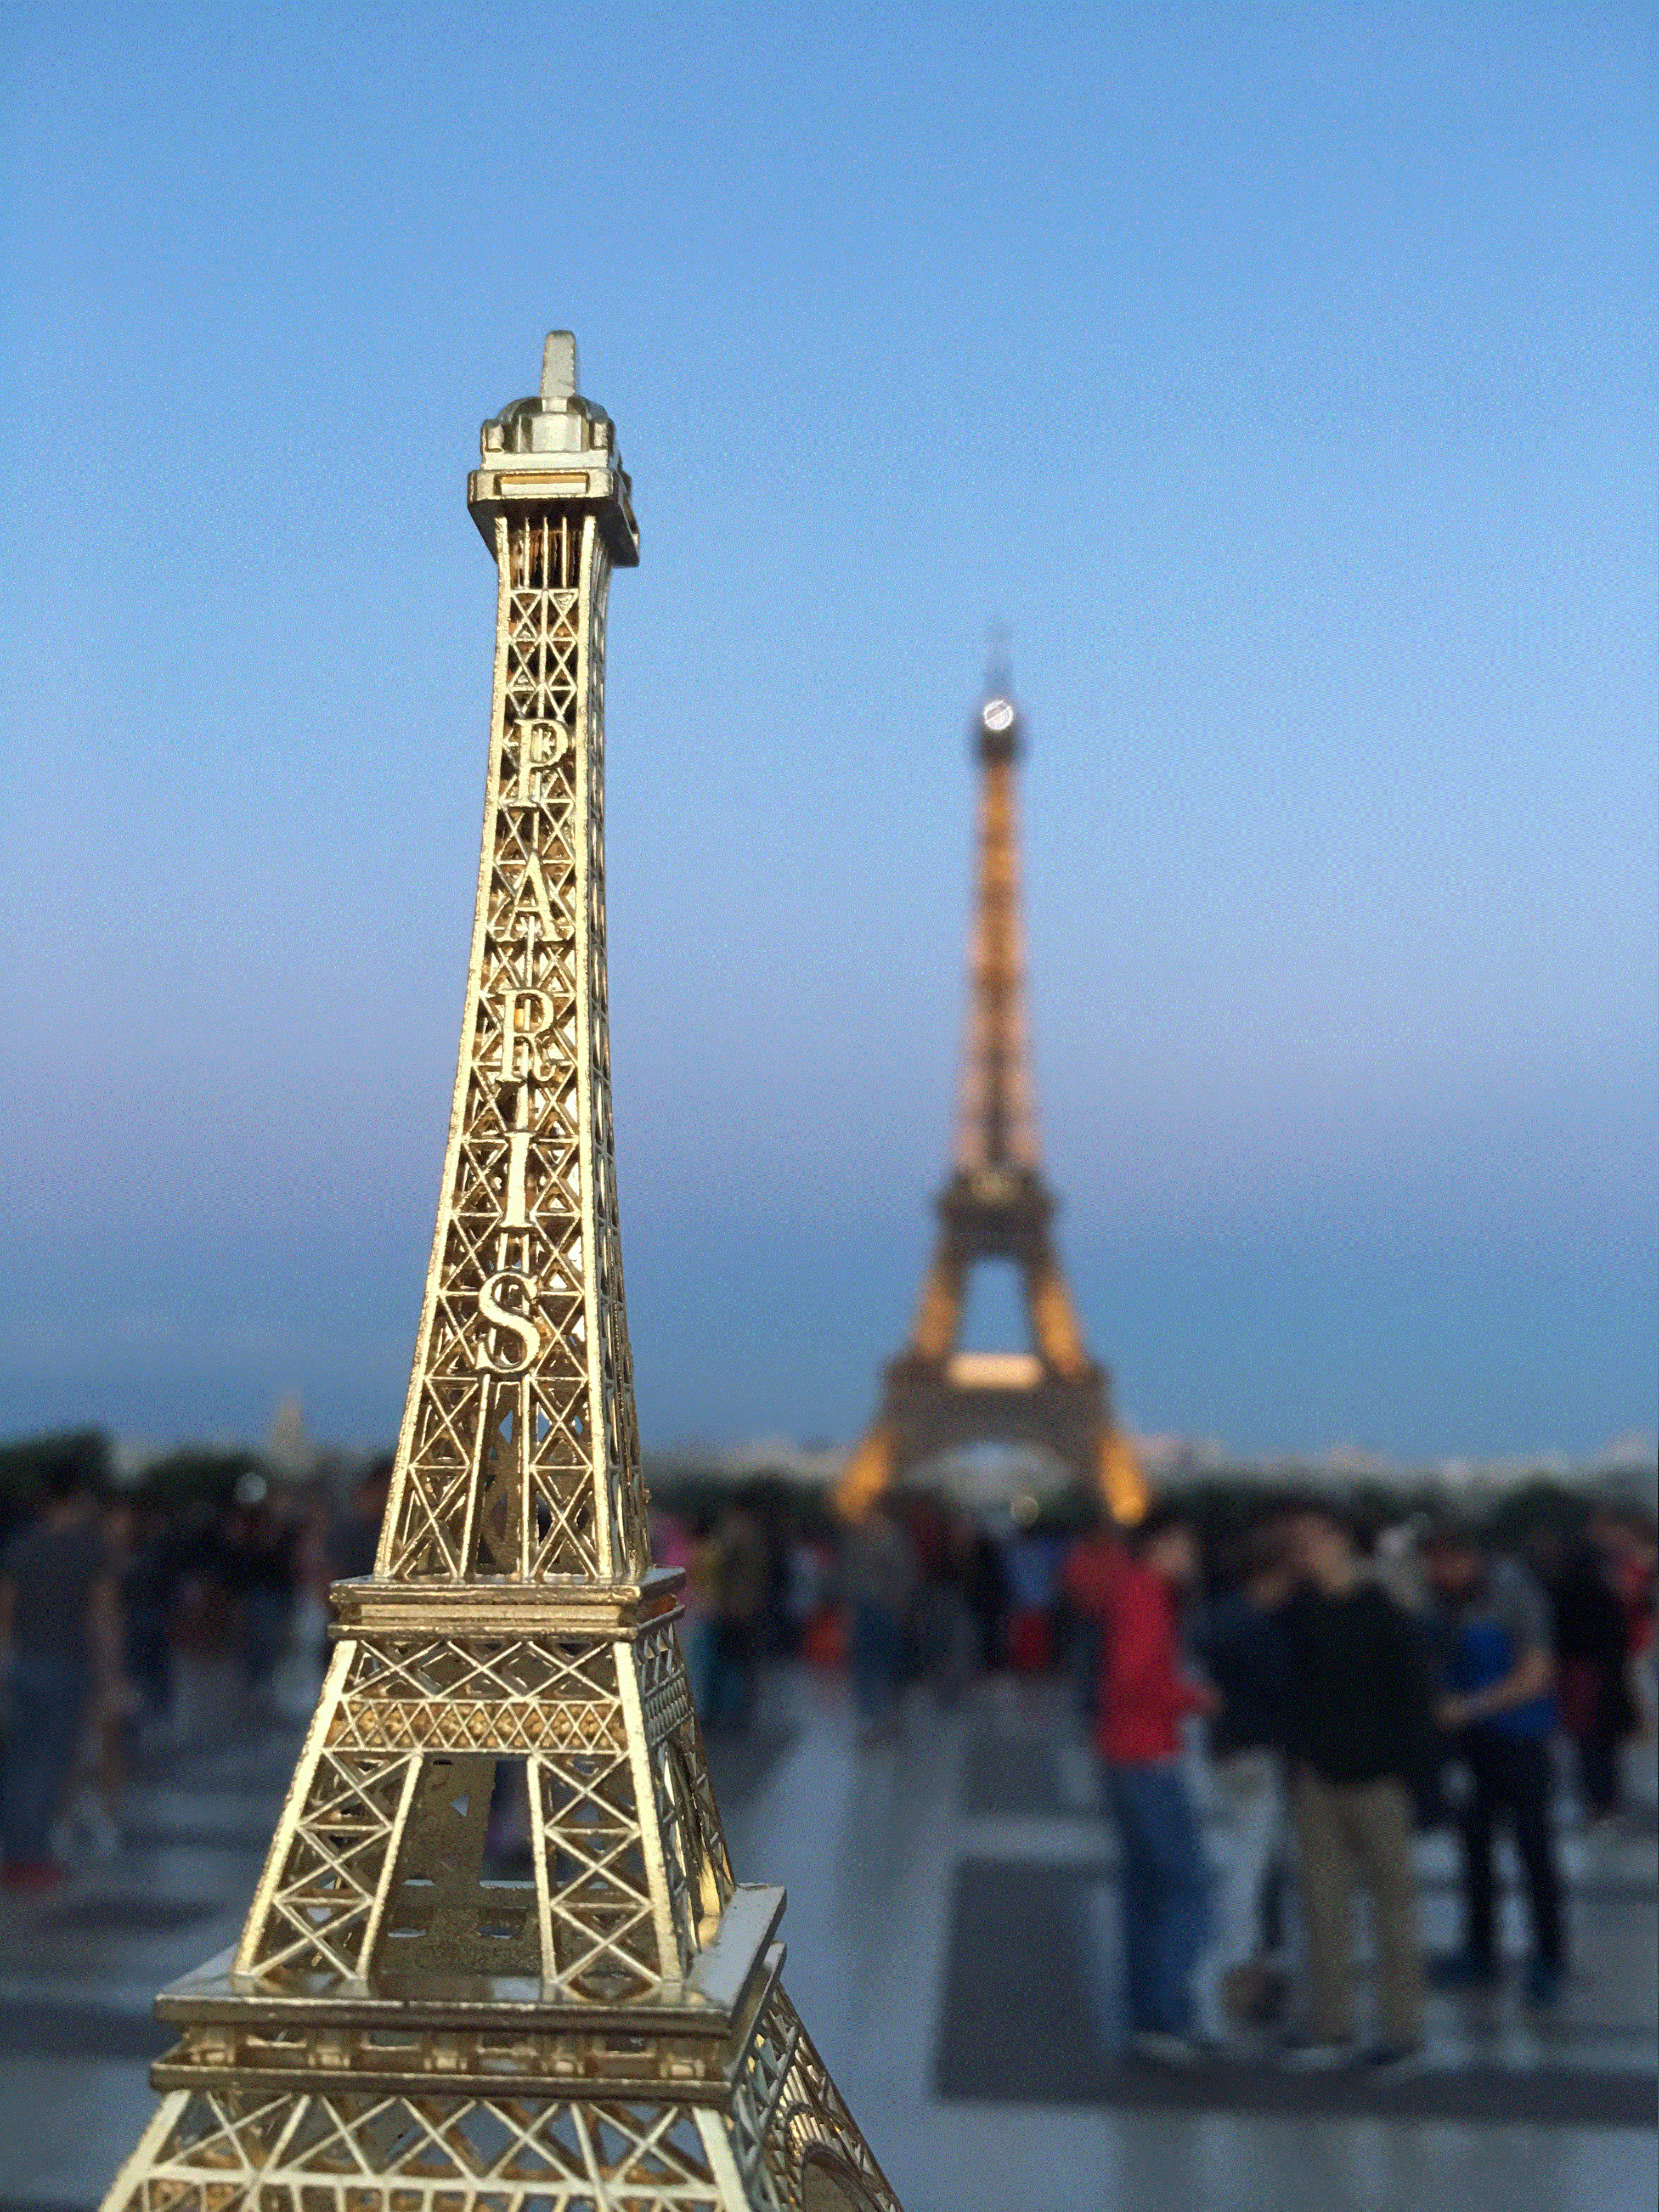 "Sometimes we waste time studying inauthentic things, not realizing we have the work right in front of us." Image and text by Kyree Allen. France, 2017.
A picture of an Eiffel Tower toy in front of the real Eiffel Tower.